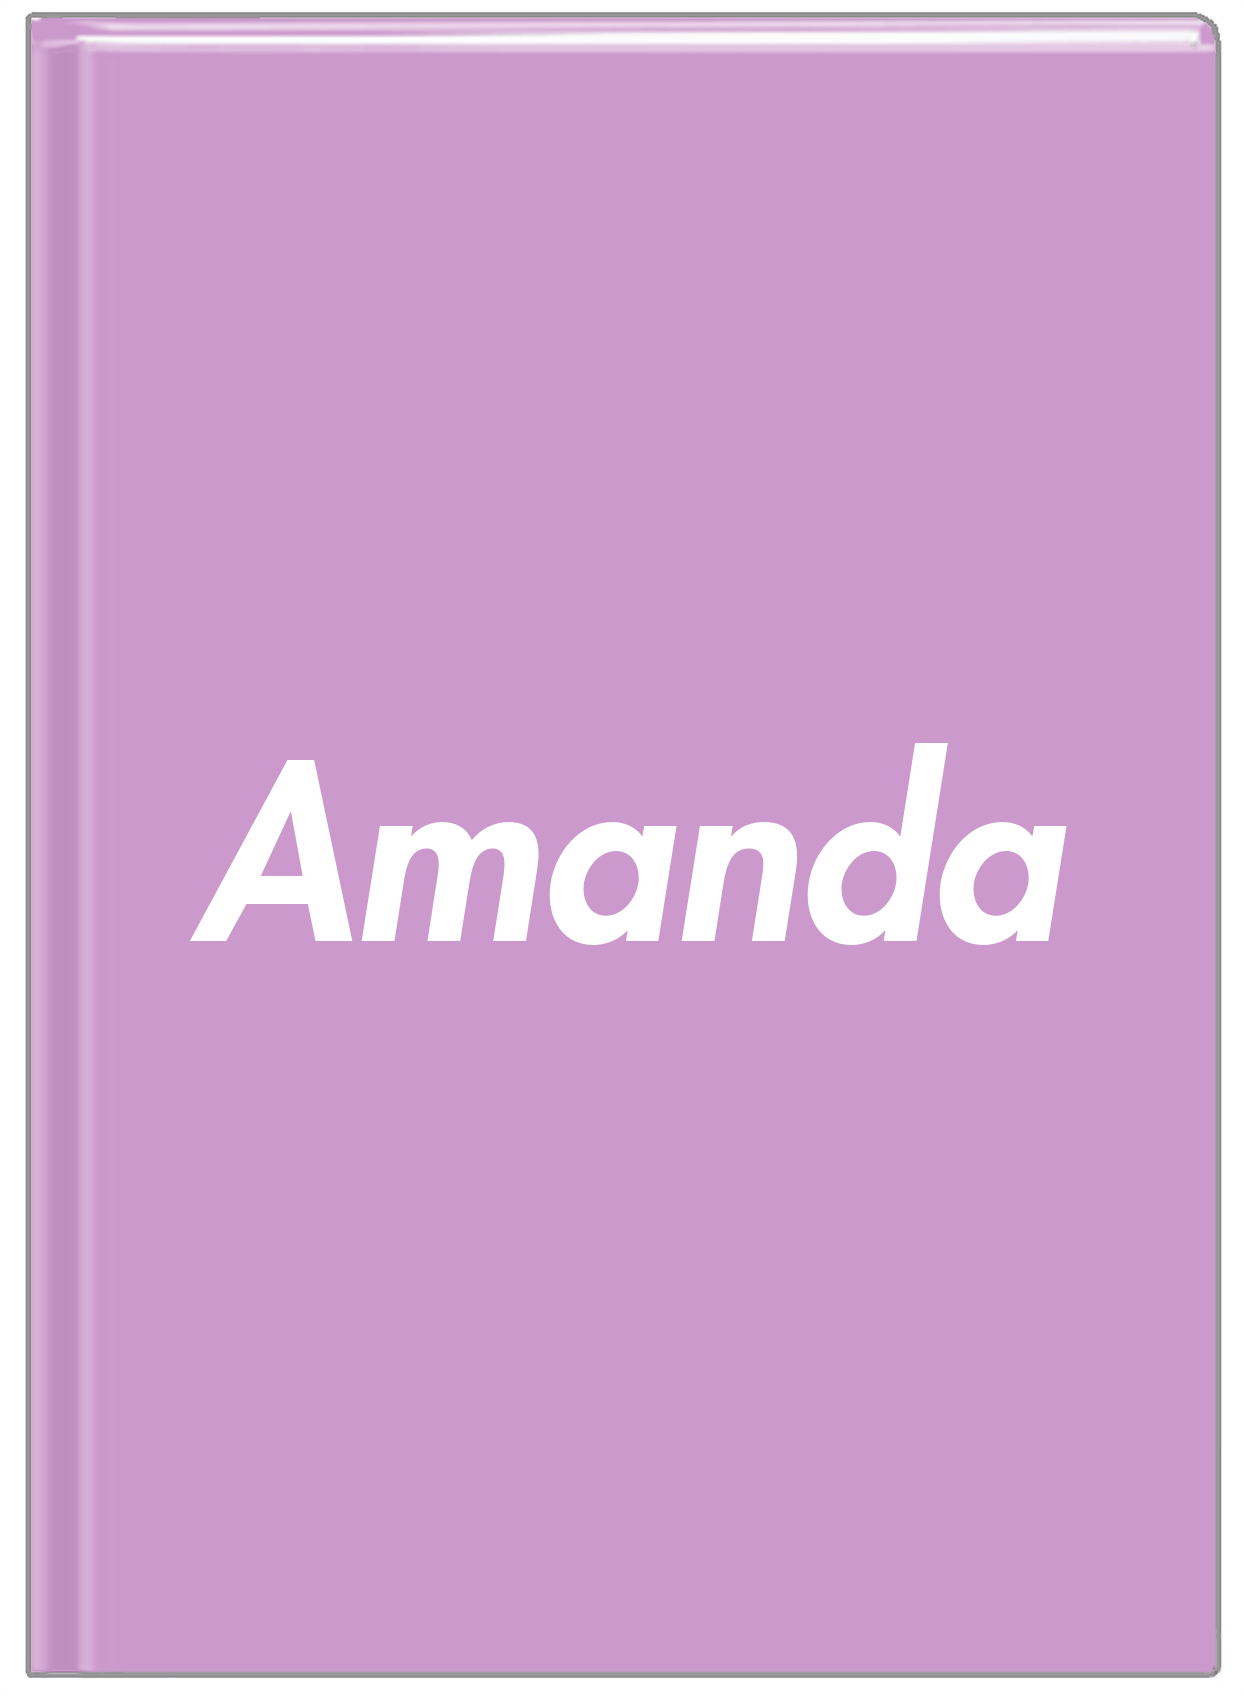 Personalized Solid Color Journal - Purple Background - Front View